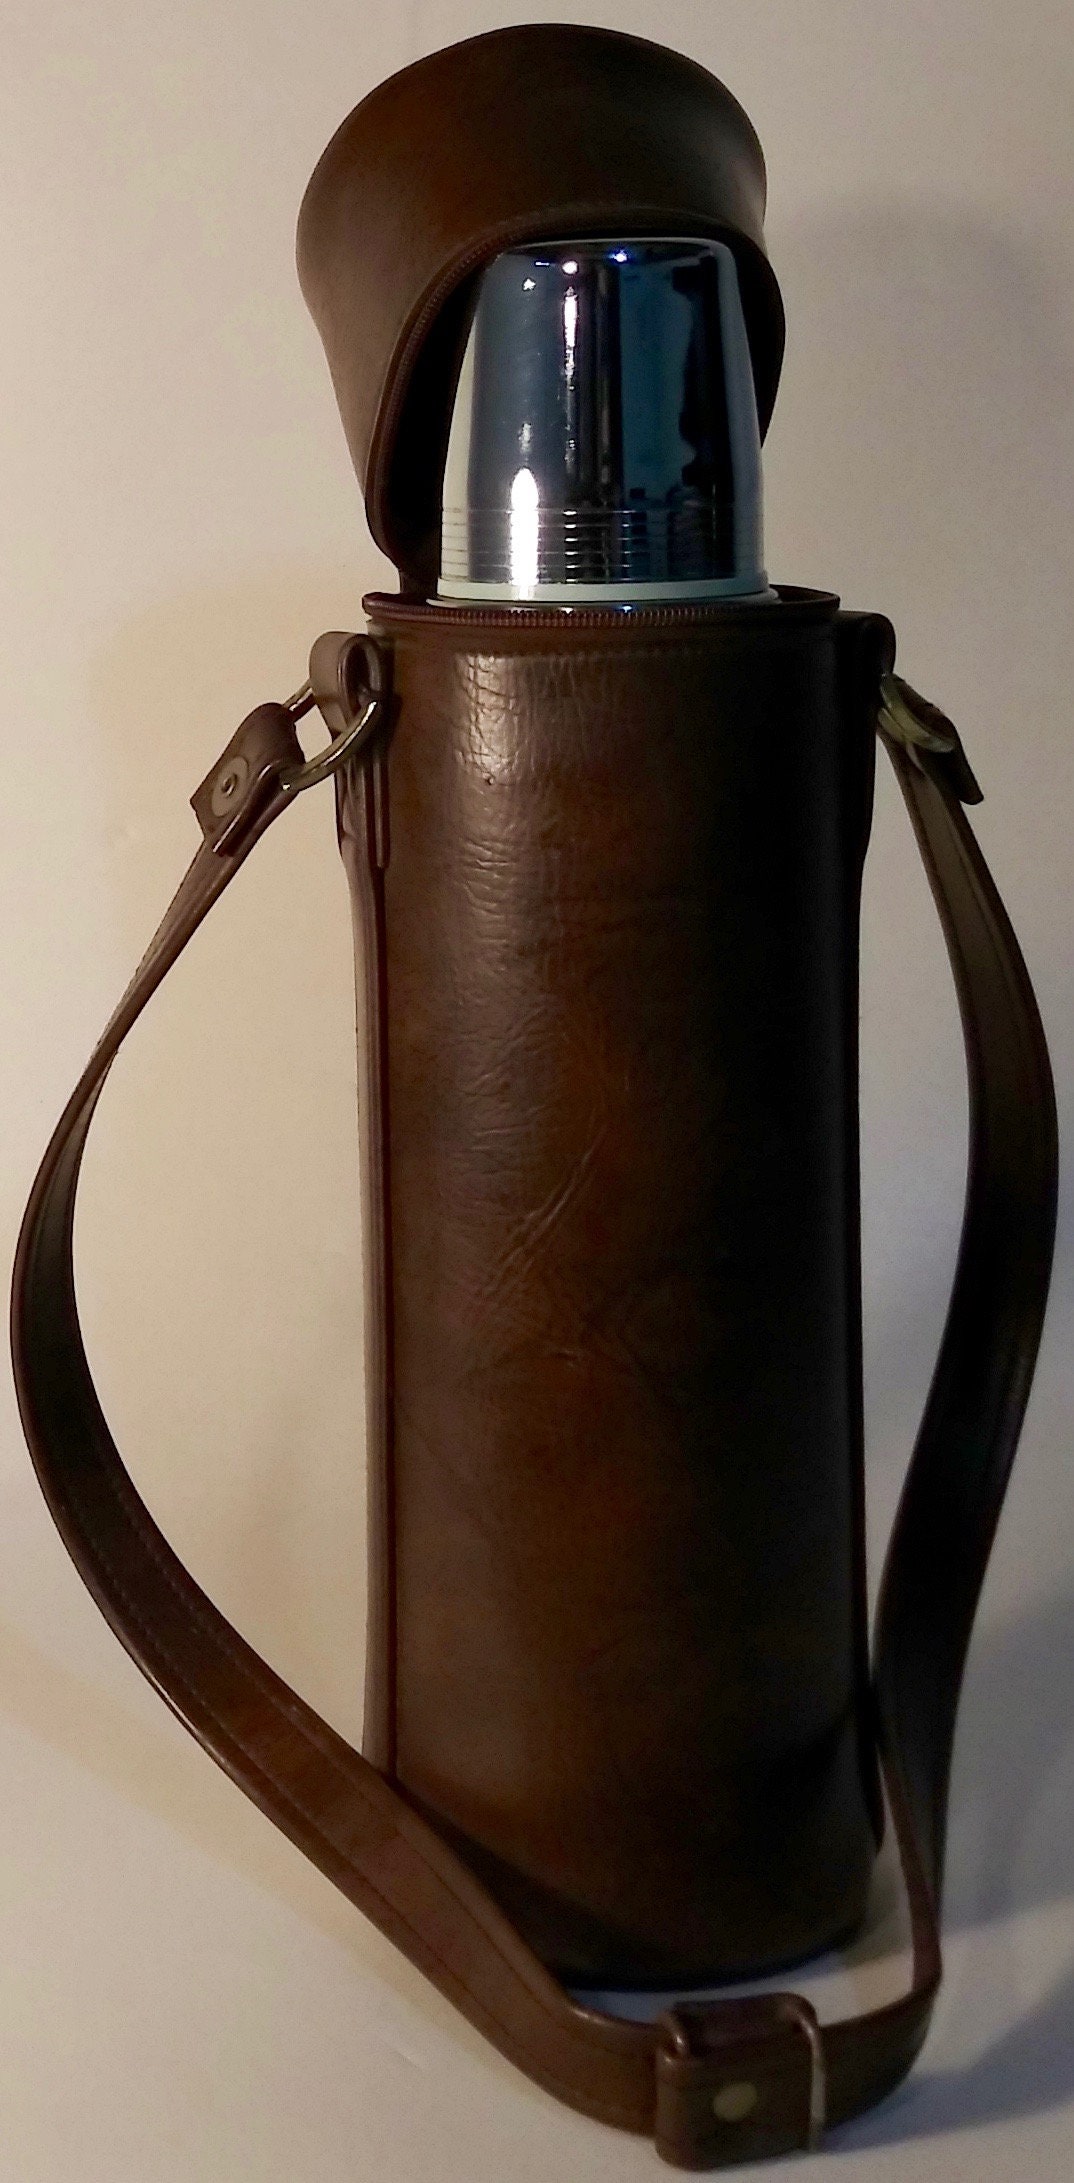 Vintage Stanley Aladdin Stainless Steel Thermos with Leather Carrying Case by Hozel Aladdin Thermos with Leather Case Combo